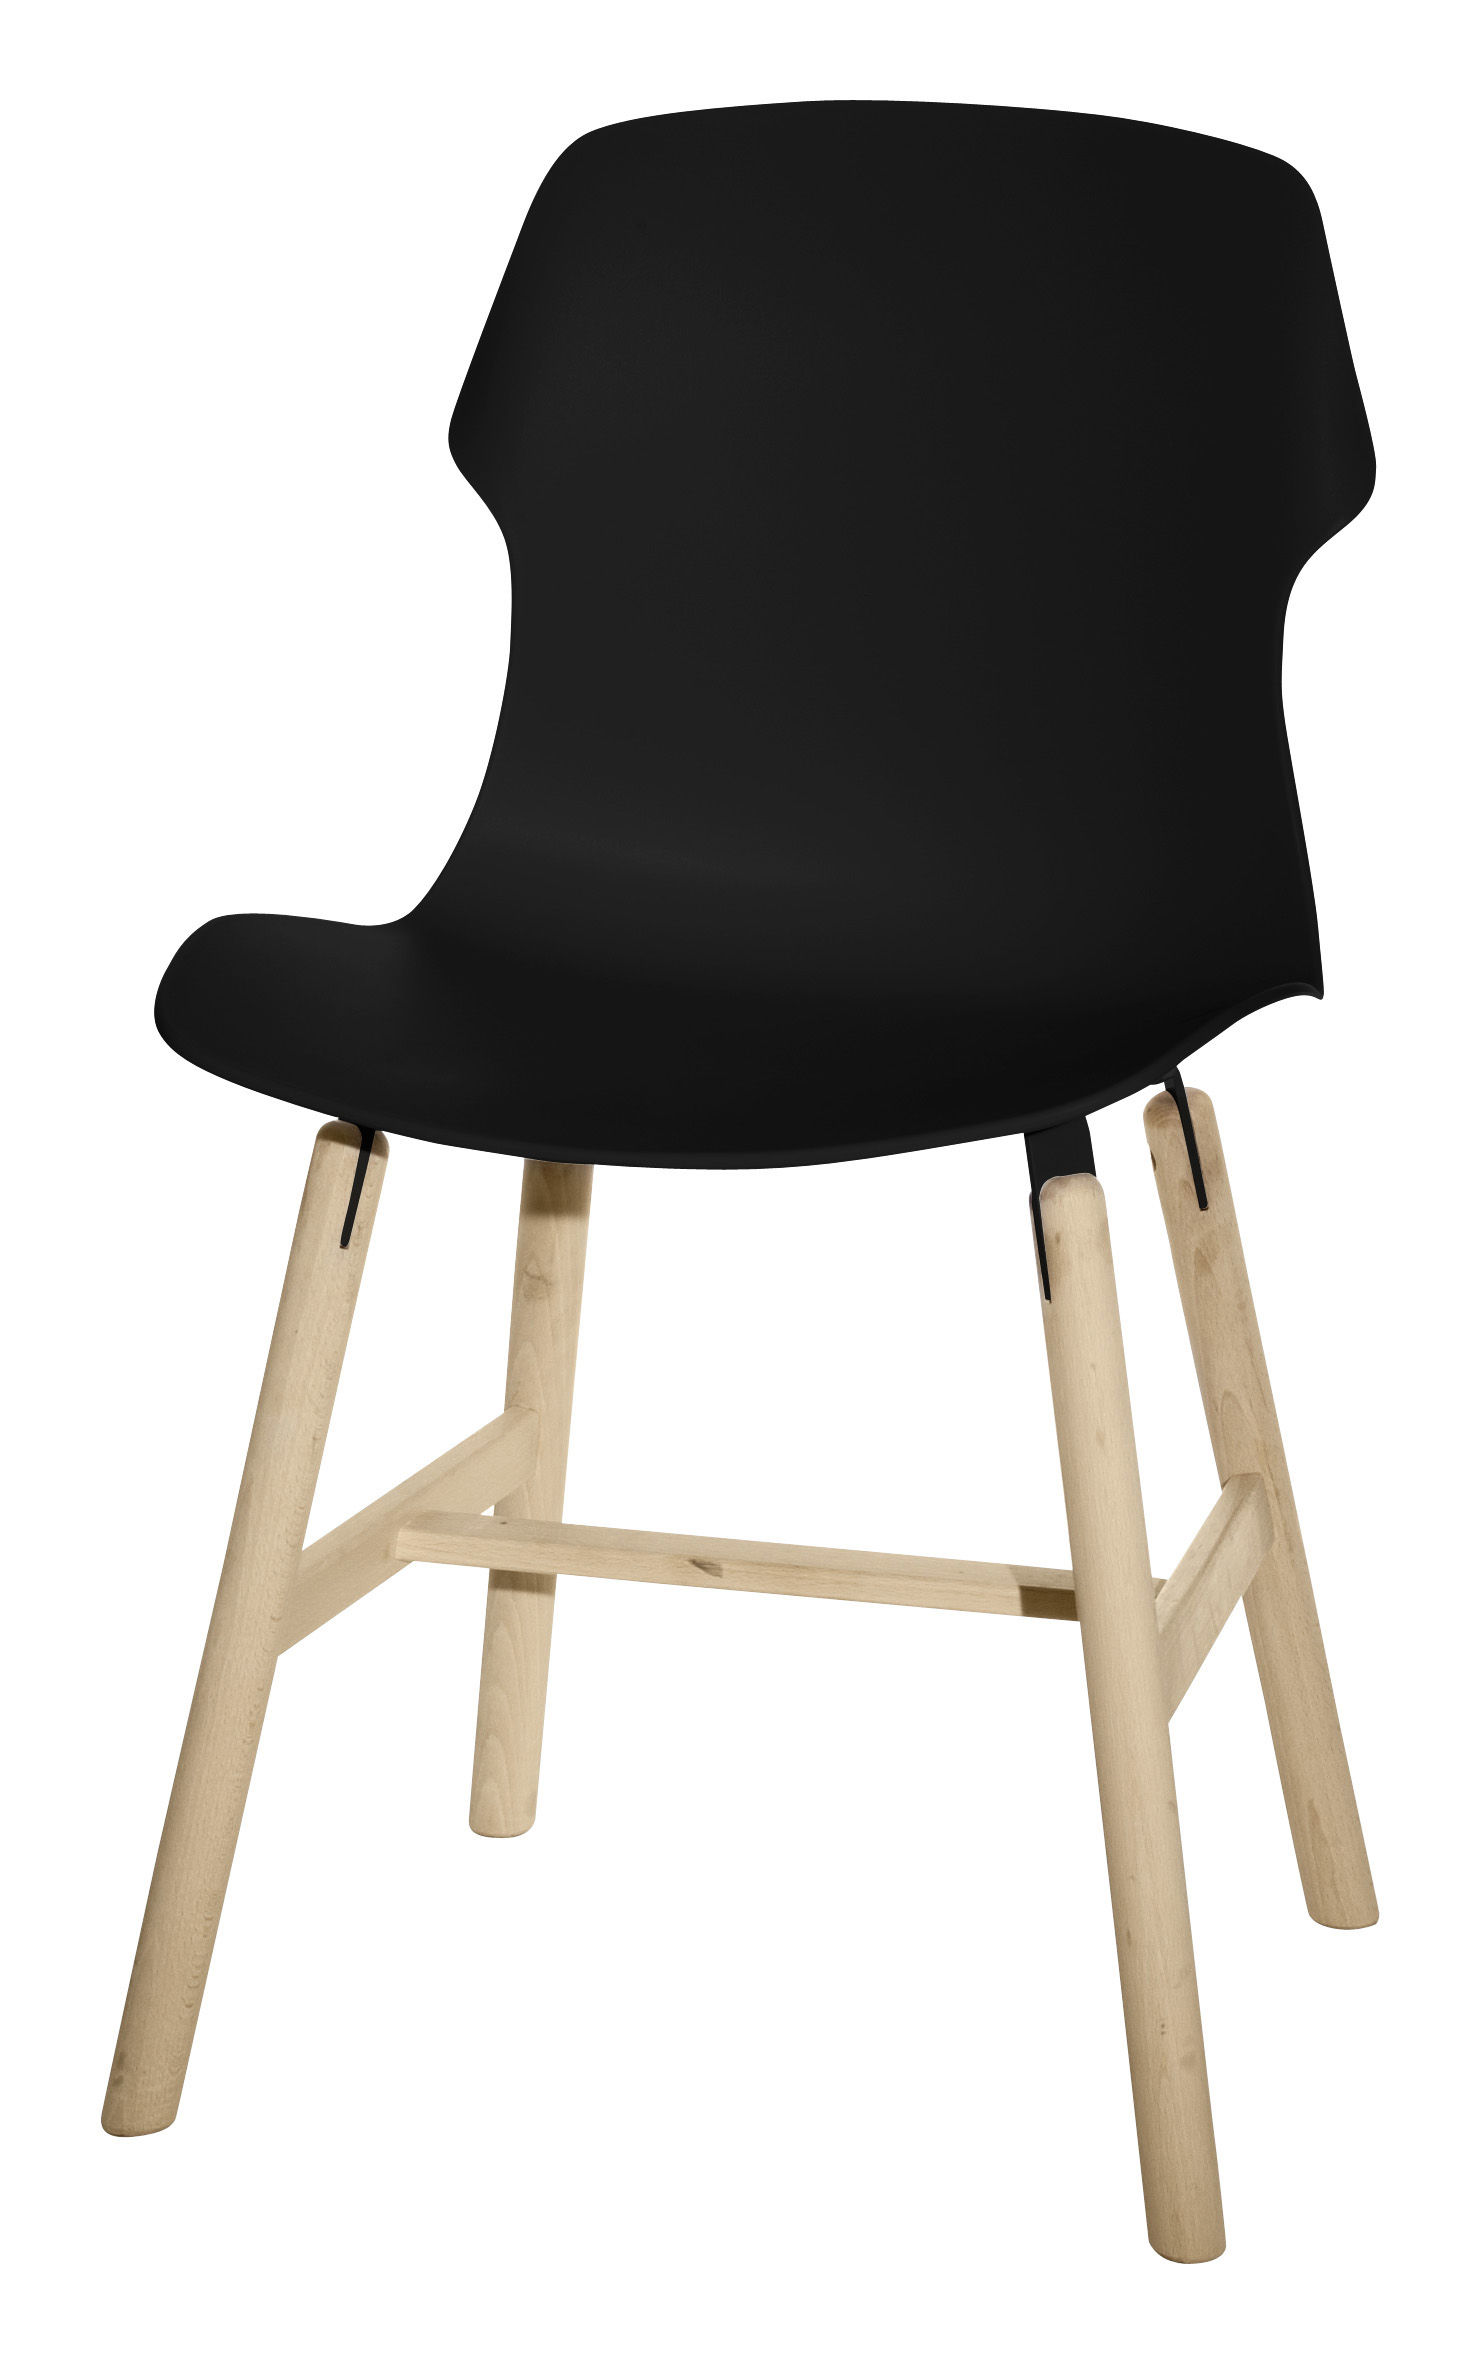 Soldes Chaises Made in Design - Chaise Stereo wood 4 pieds bois Casamania